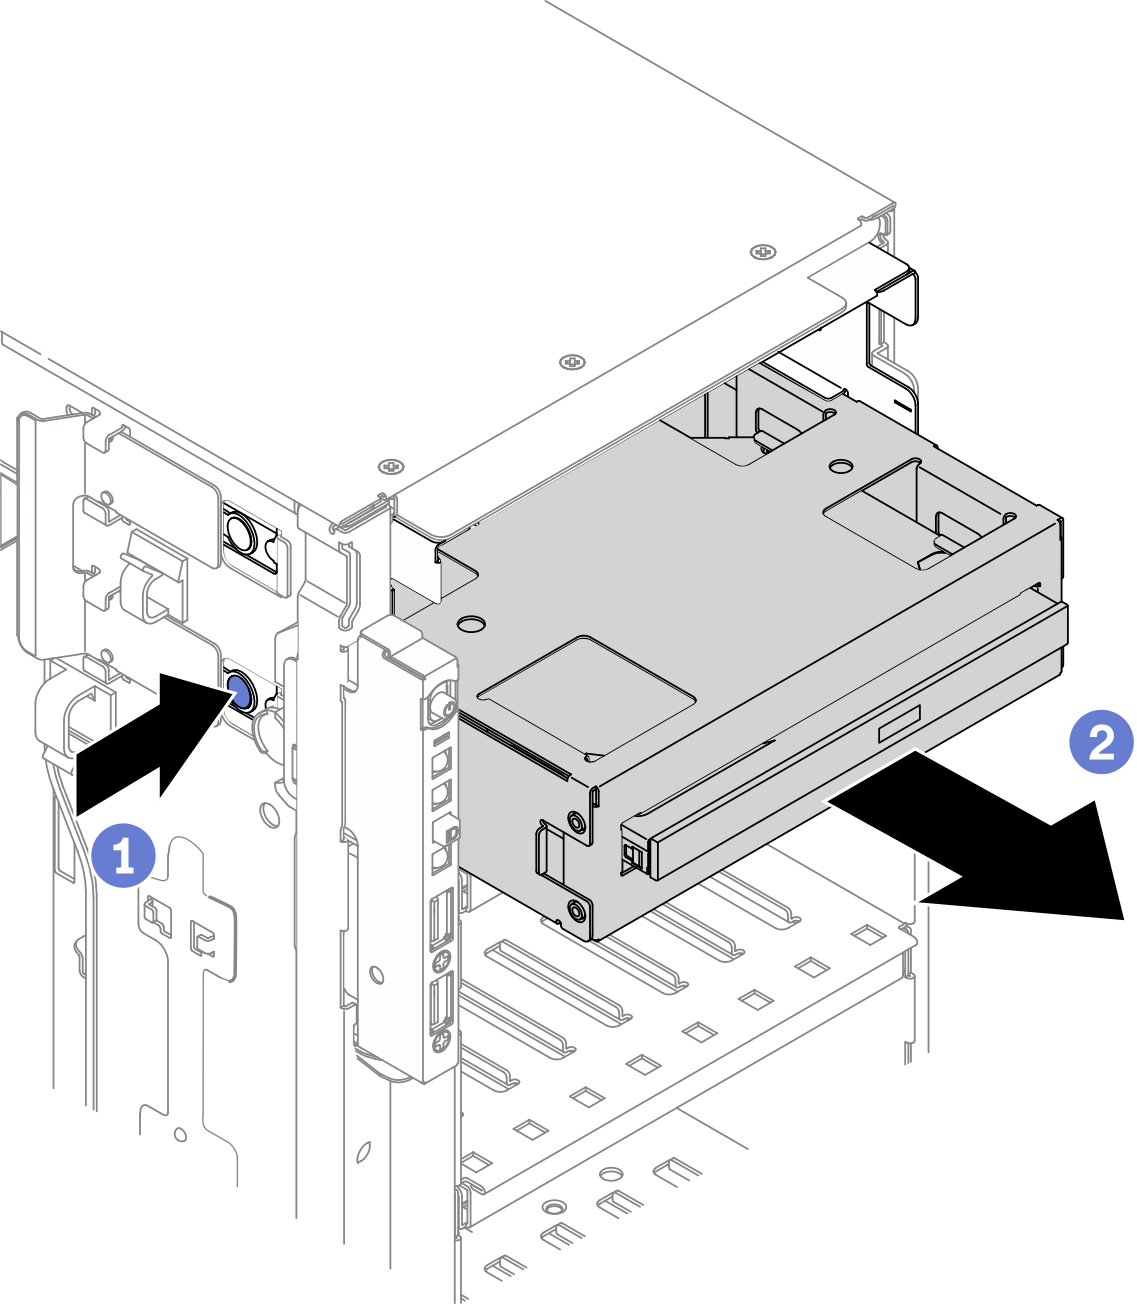 5.25-inch drive bay adapter assembly removal